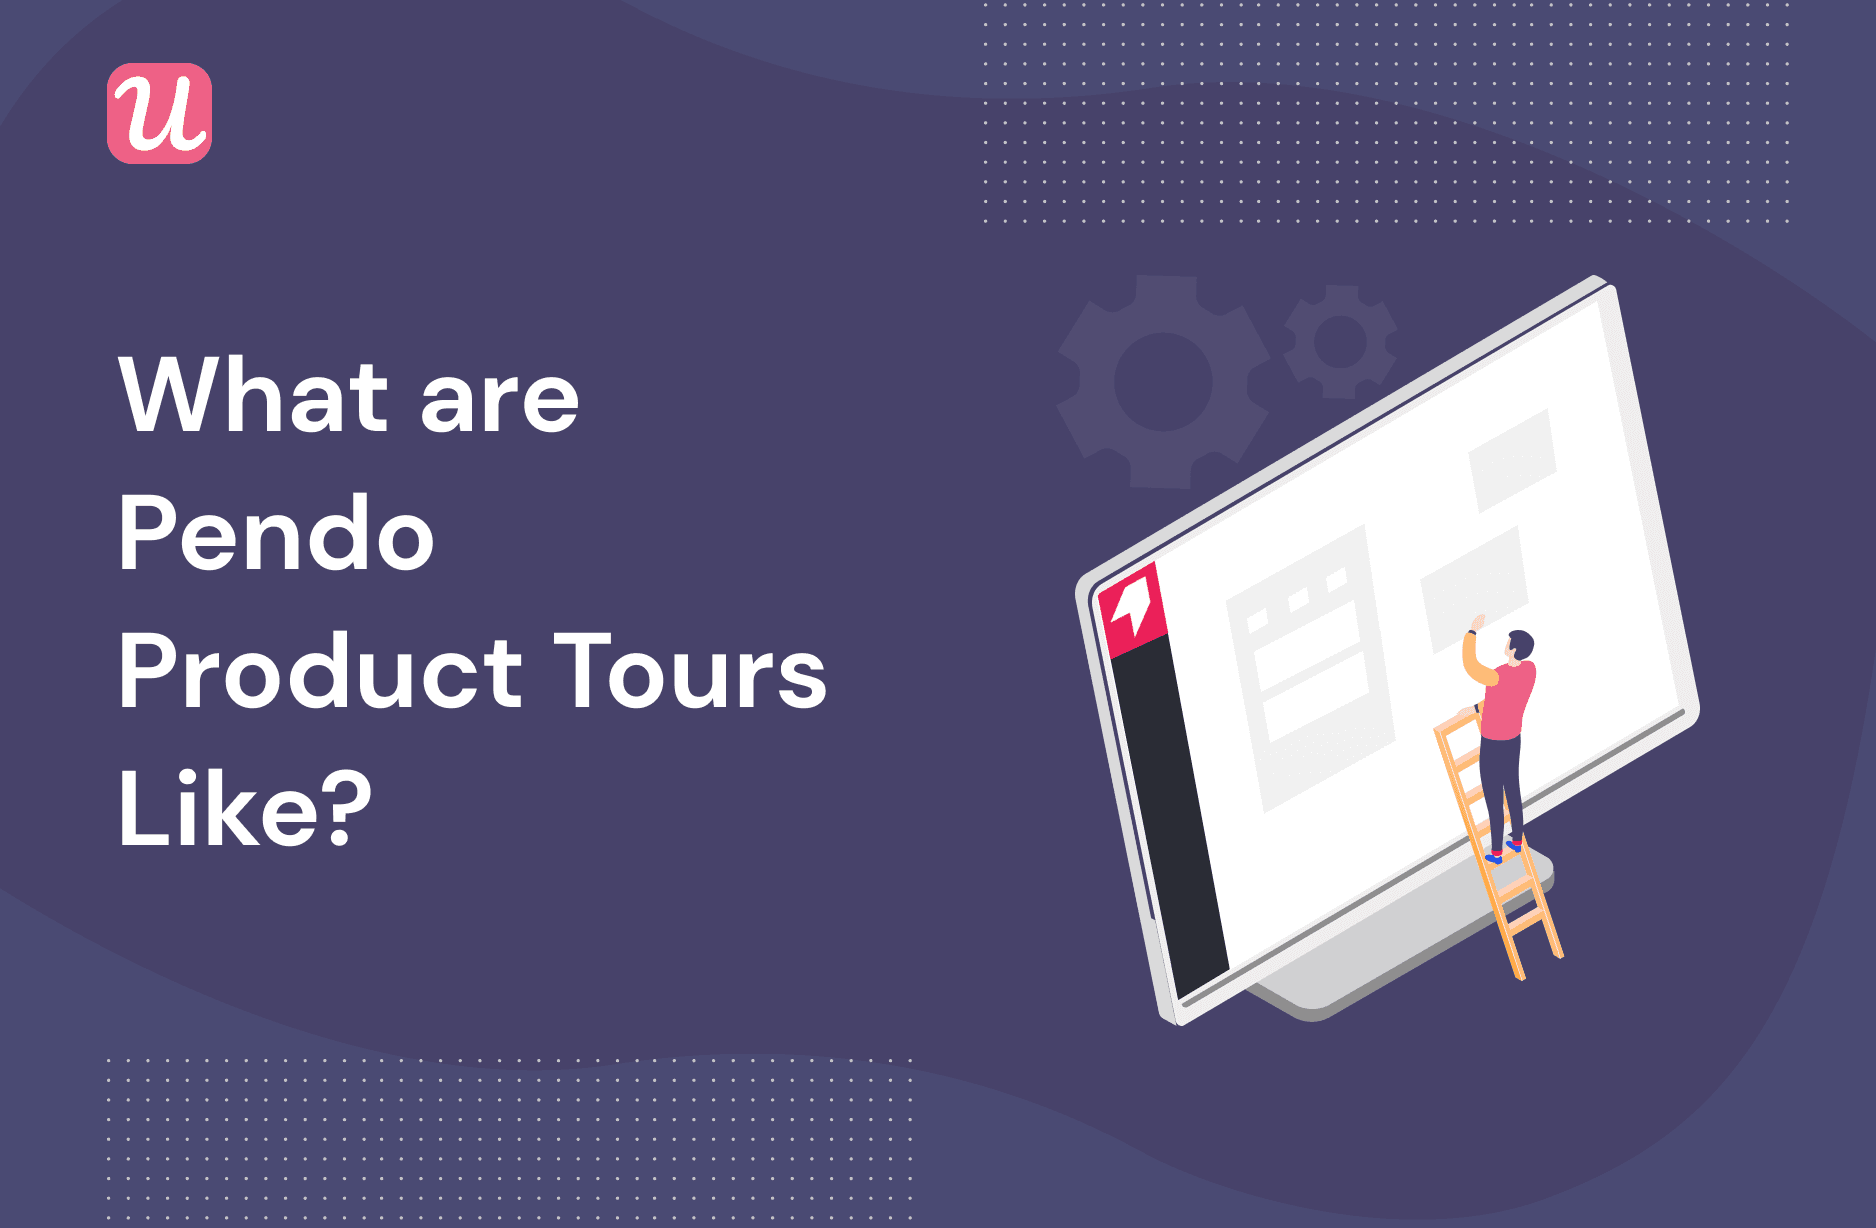 What are Pendo Product Tours Like?